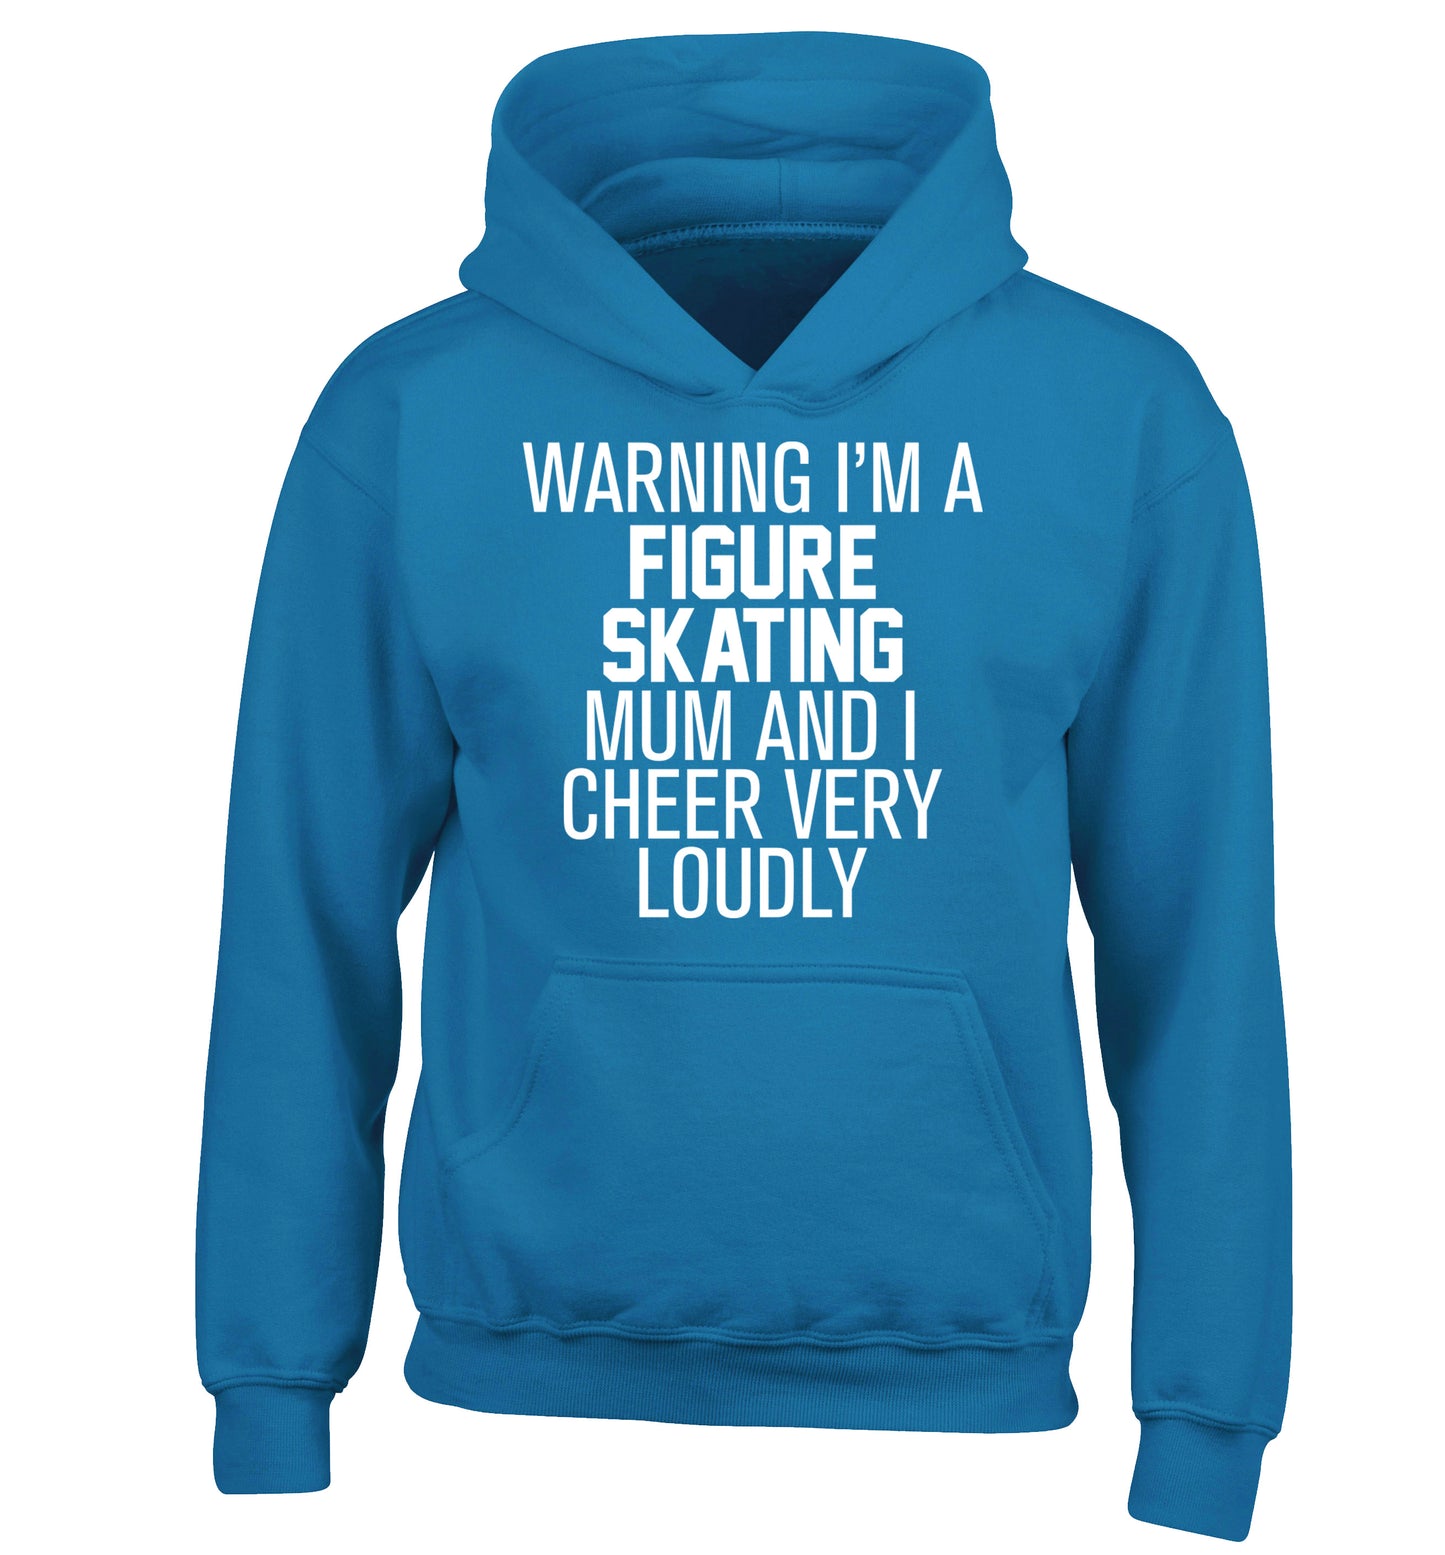 Warning I'm a figure skating mum and I cheer very loudly children's blue hoodie 12-14 Years